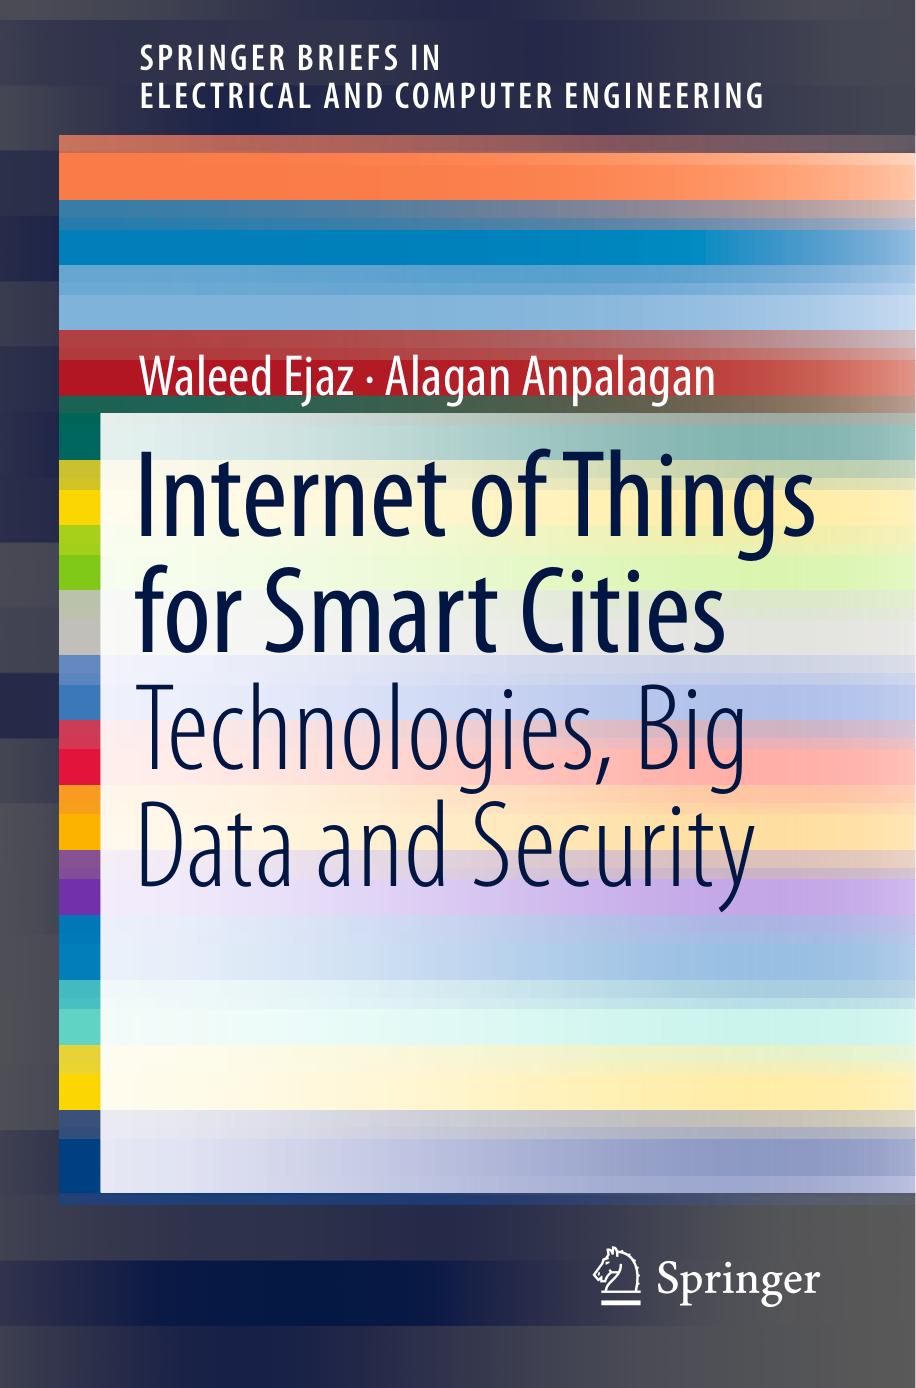 Internet of Things for Smart Cities: Technologies, Big Data and Security